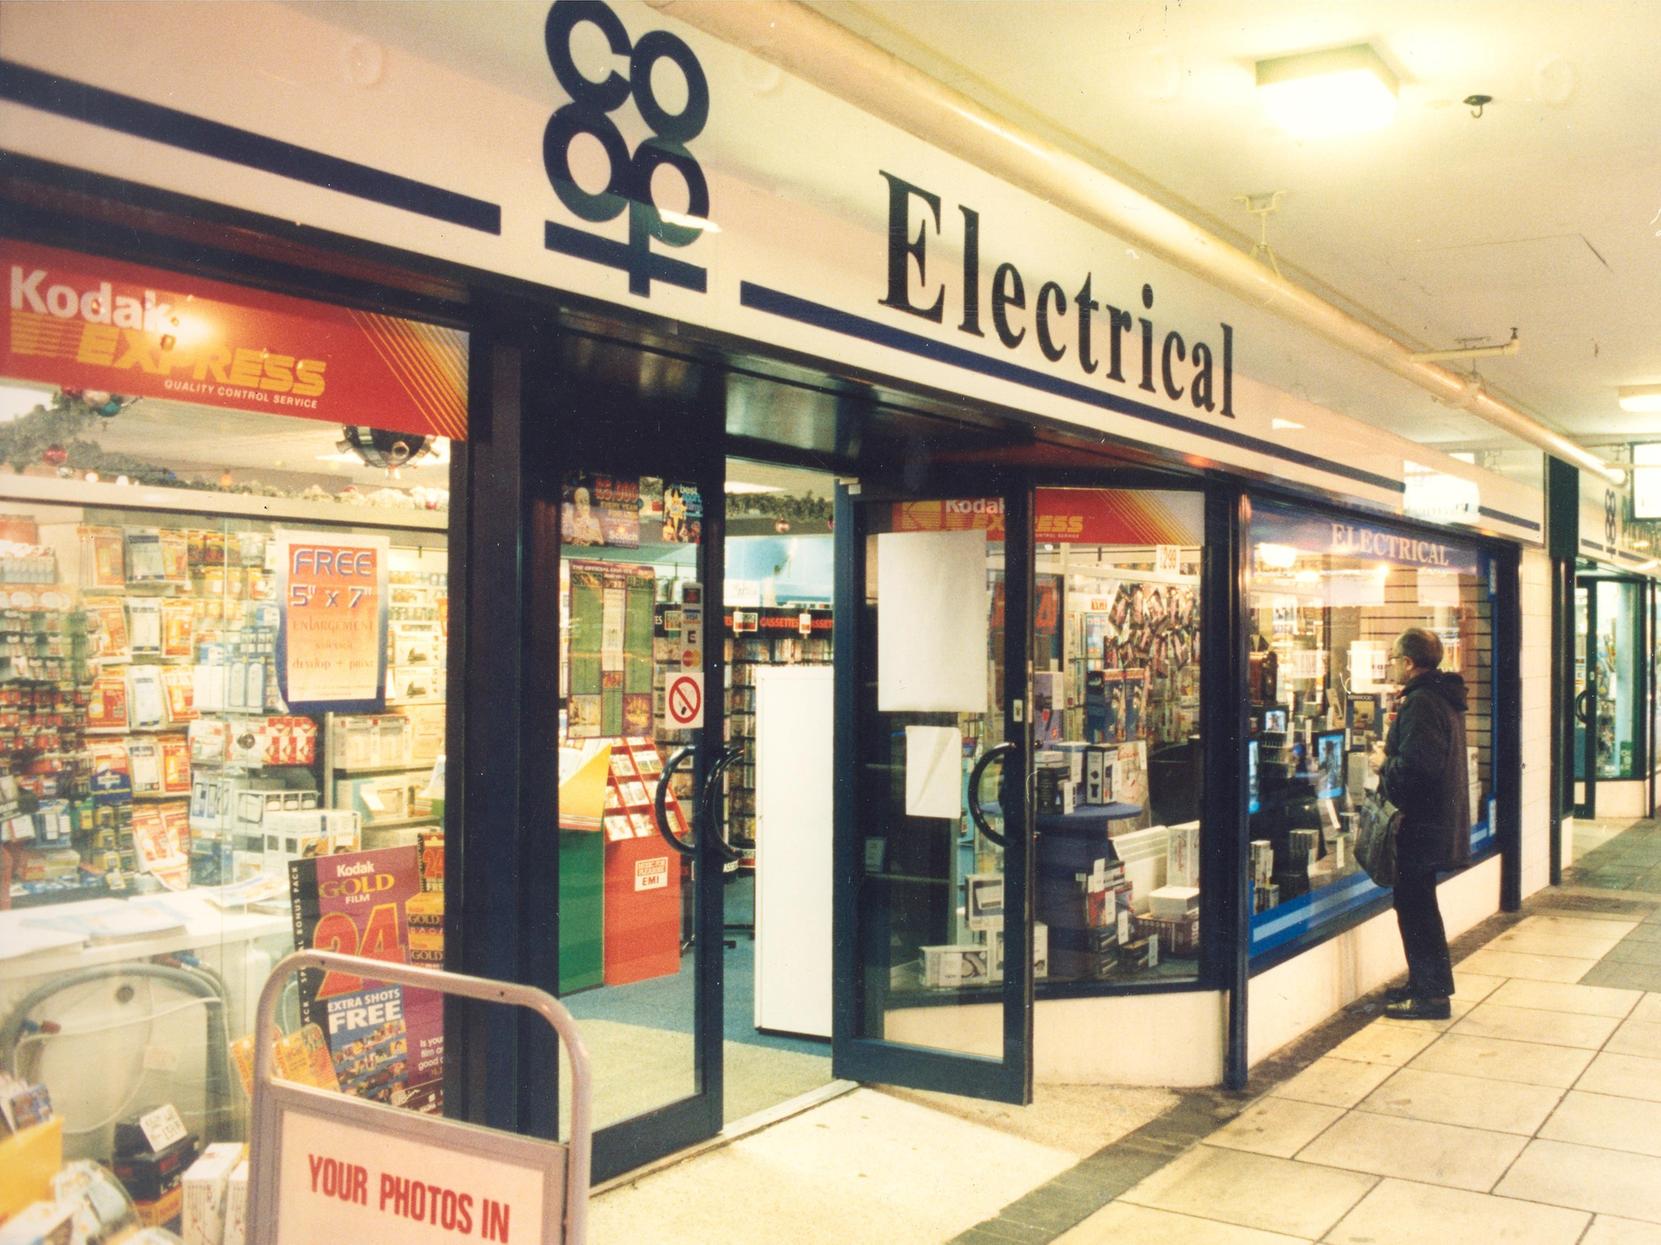 Do you remember shopping here back in the day?